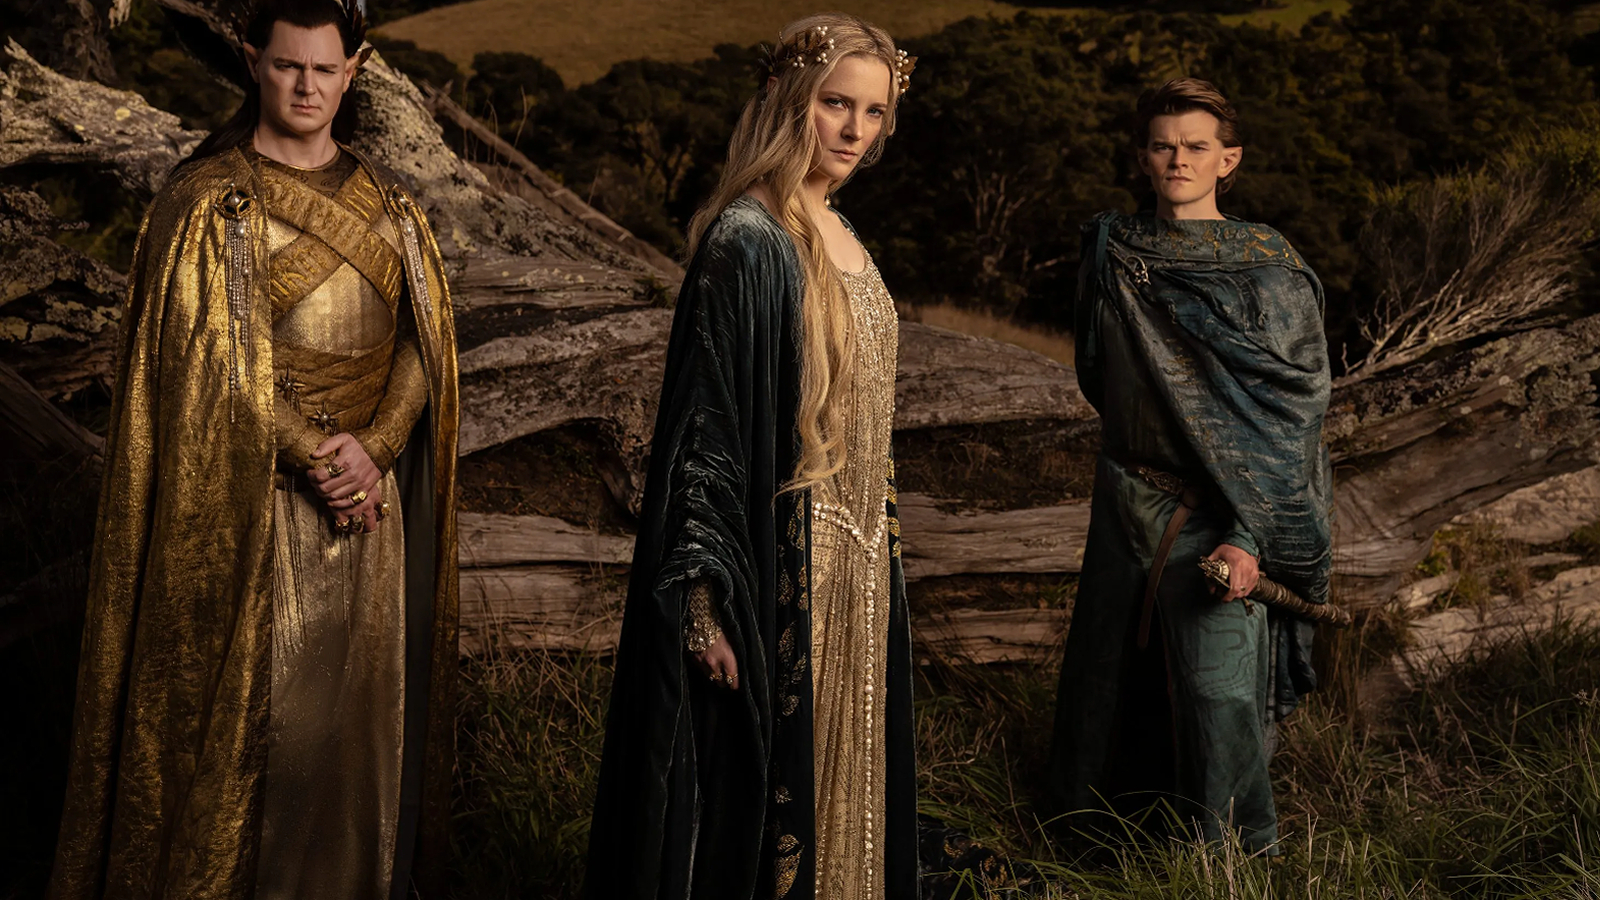 Gil-Galad, Galadriel, and Elrond in a Lord of the Rings: The Rings of Power promotional still